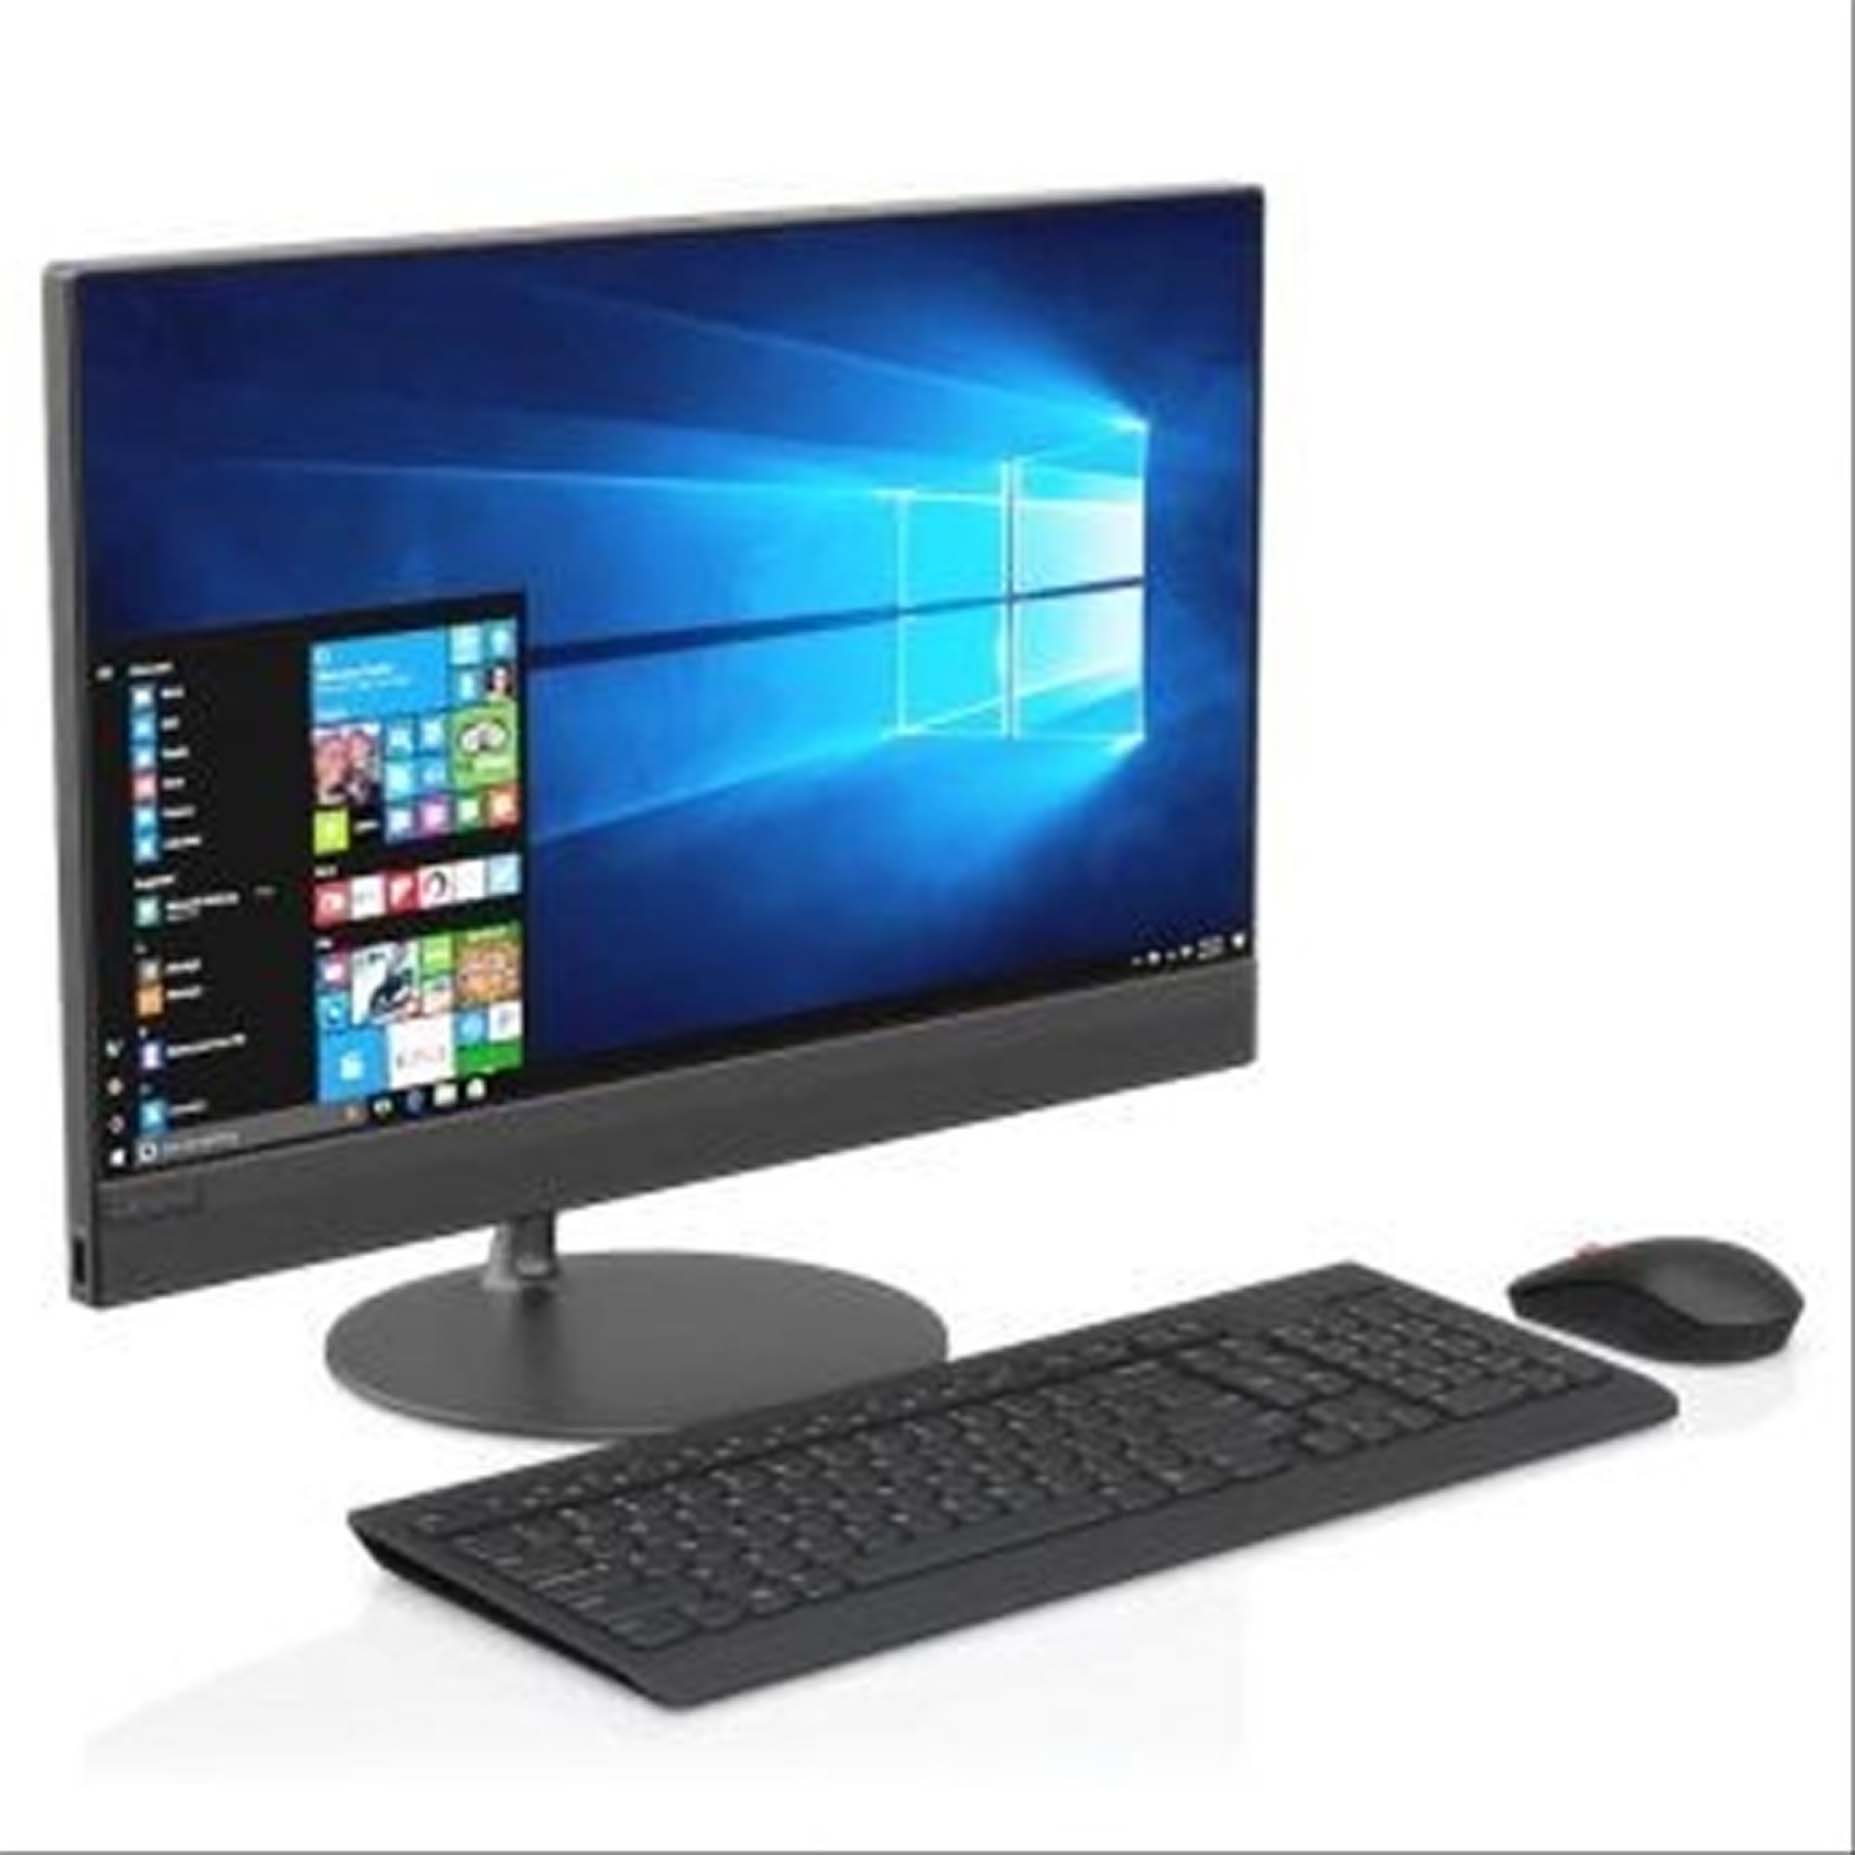 Harga Lenovo IdeaCentre 520-22ICB 0KID All in One i5-8400T 4GB 2TB Integrated Win10 21.5 Inch Black